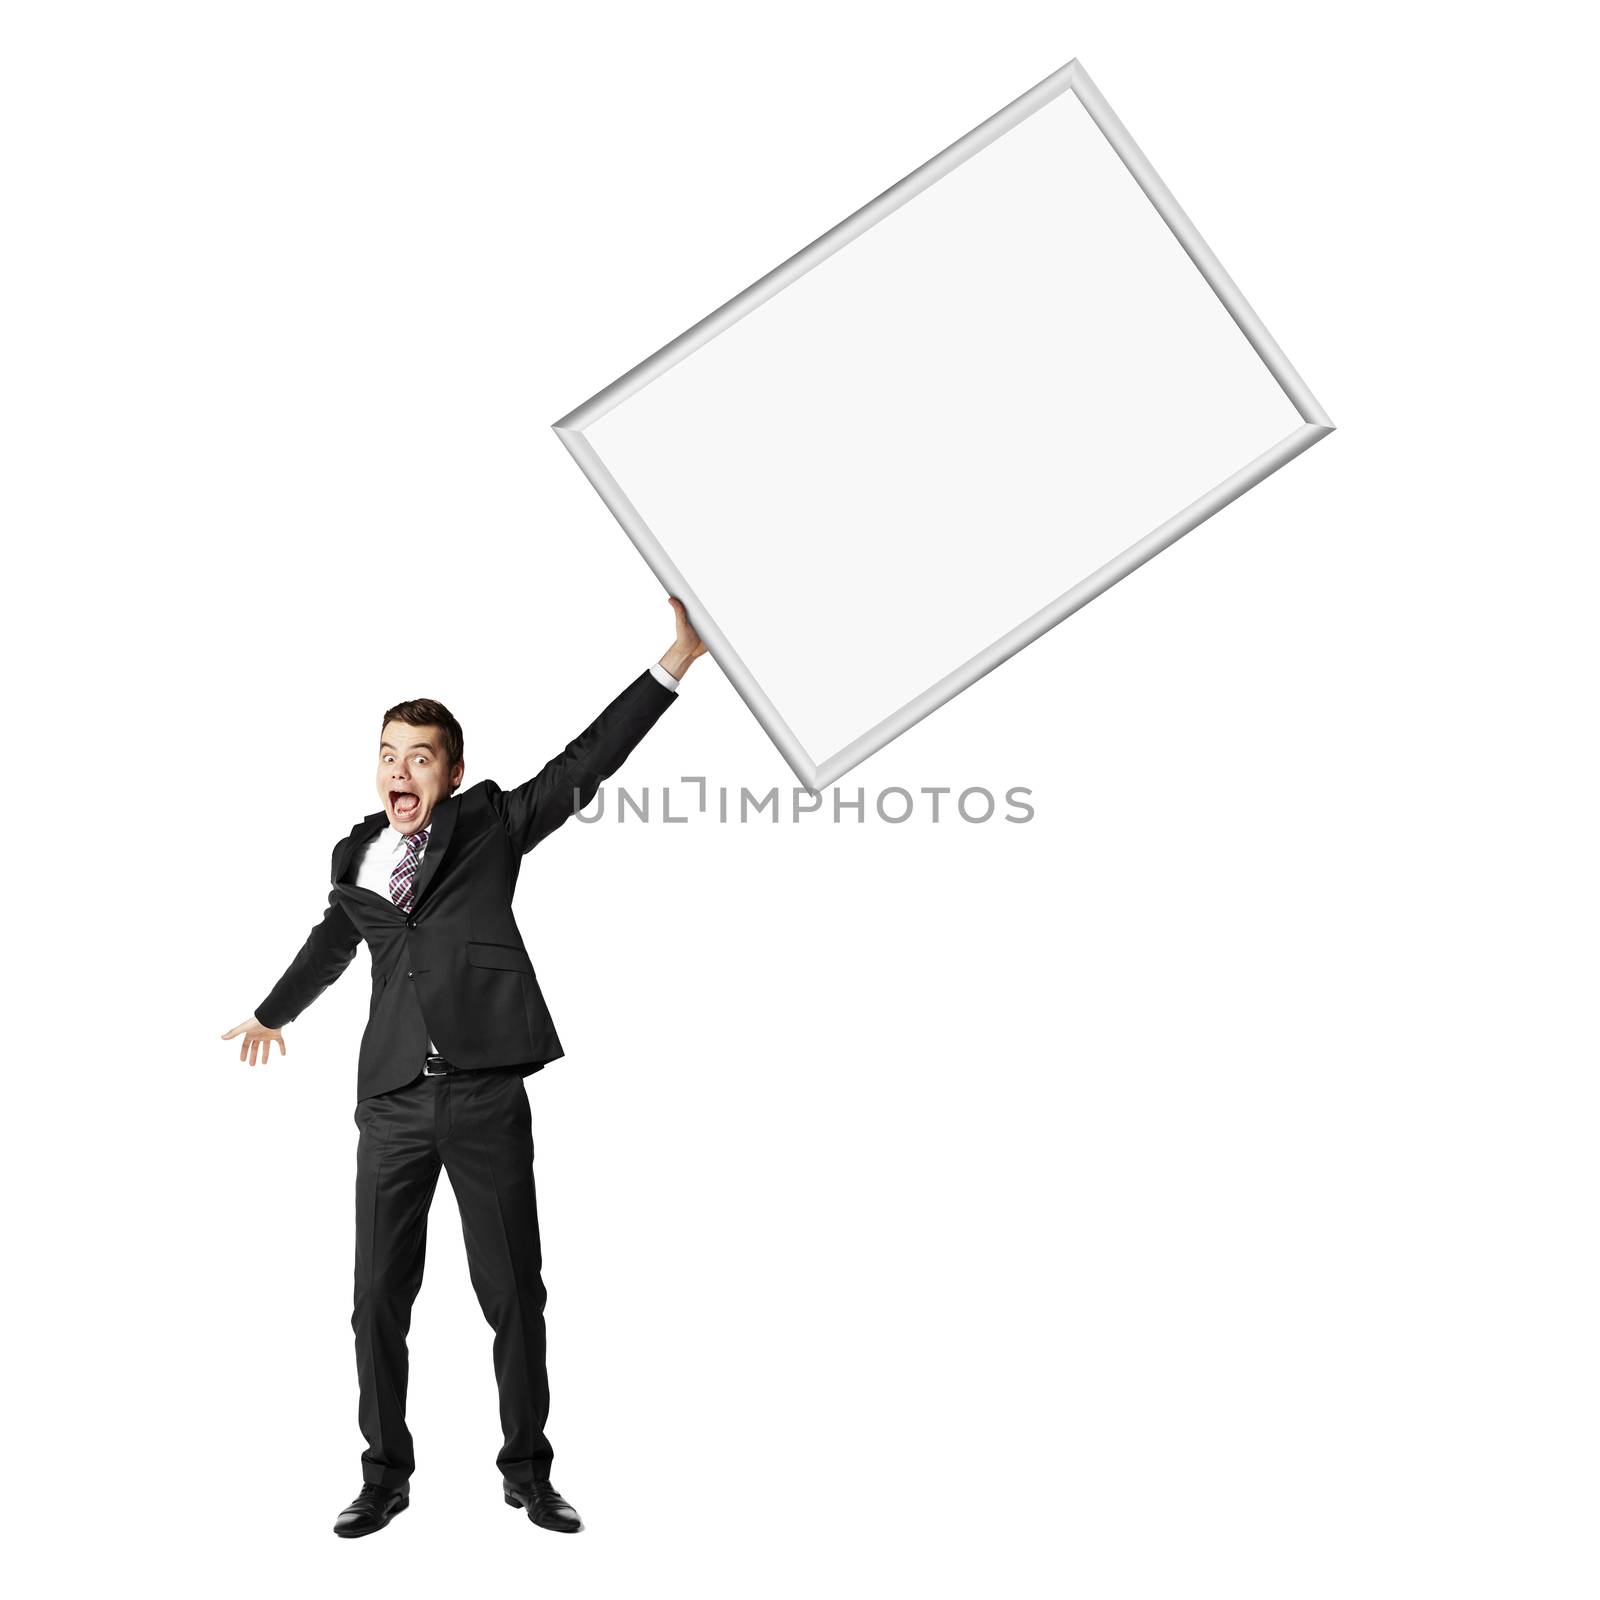 Young man holding a blank placard against white background. Copy Space.